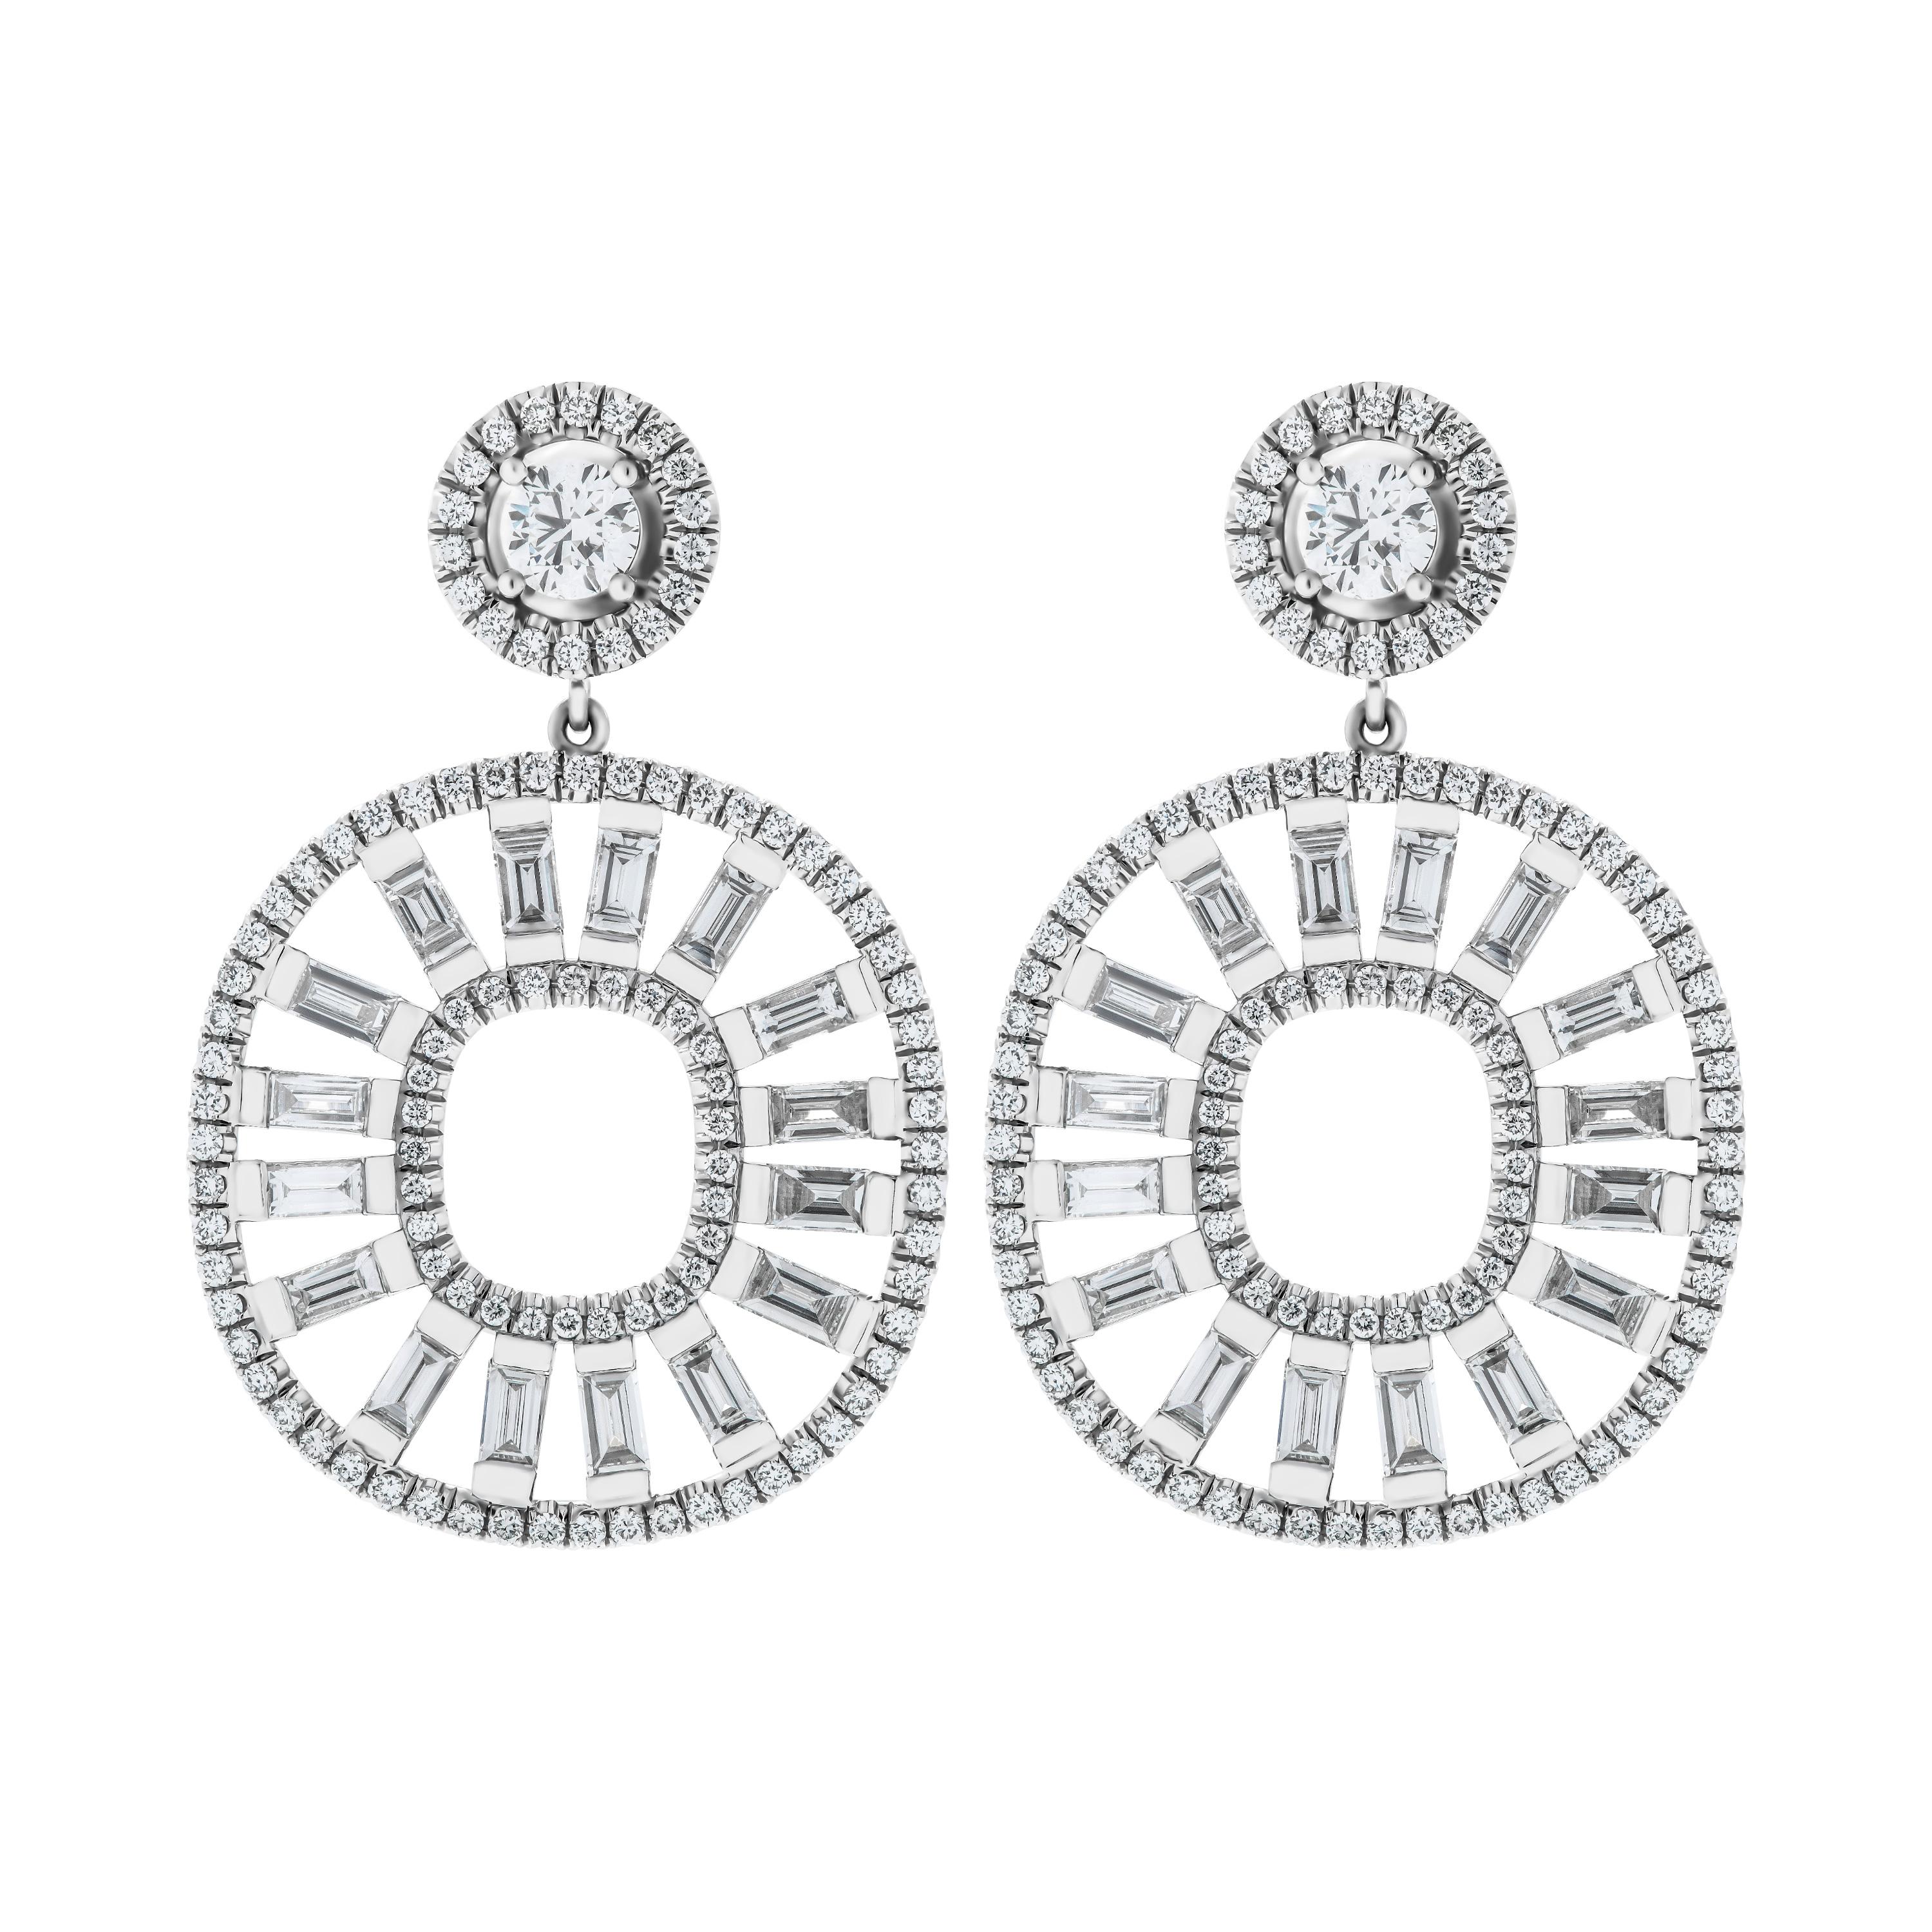 Unique and Elegant, one of a kind custom made Earrings that you won't see anywhere else!
Earring featuring 16 baguette diamonds (each earring)  totaling 3.83ct on the bottom pave wire, and 2 GIA certified round diamonds on the top: 
0.40ct G VS1